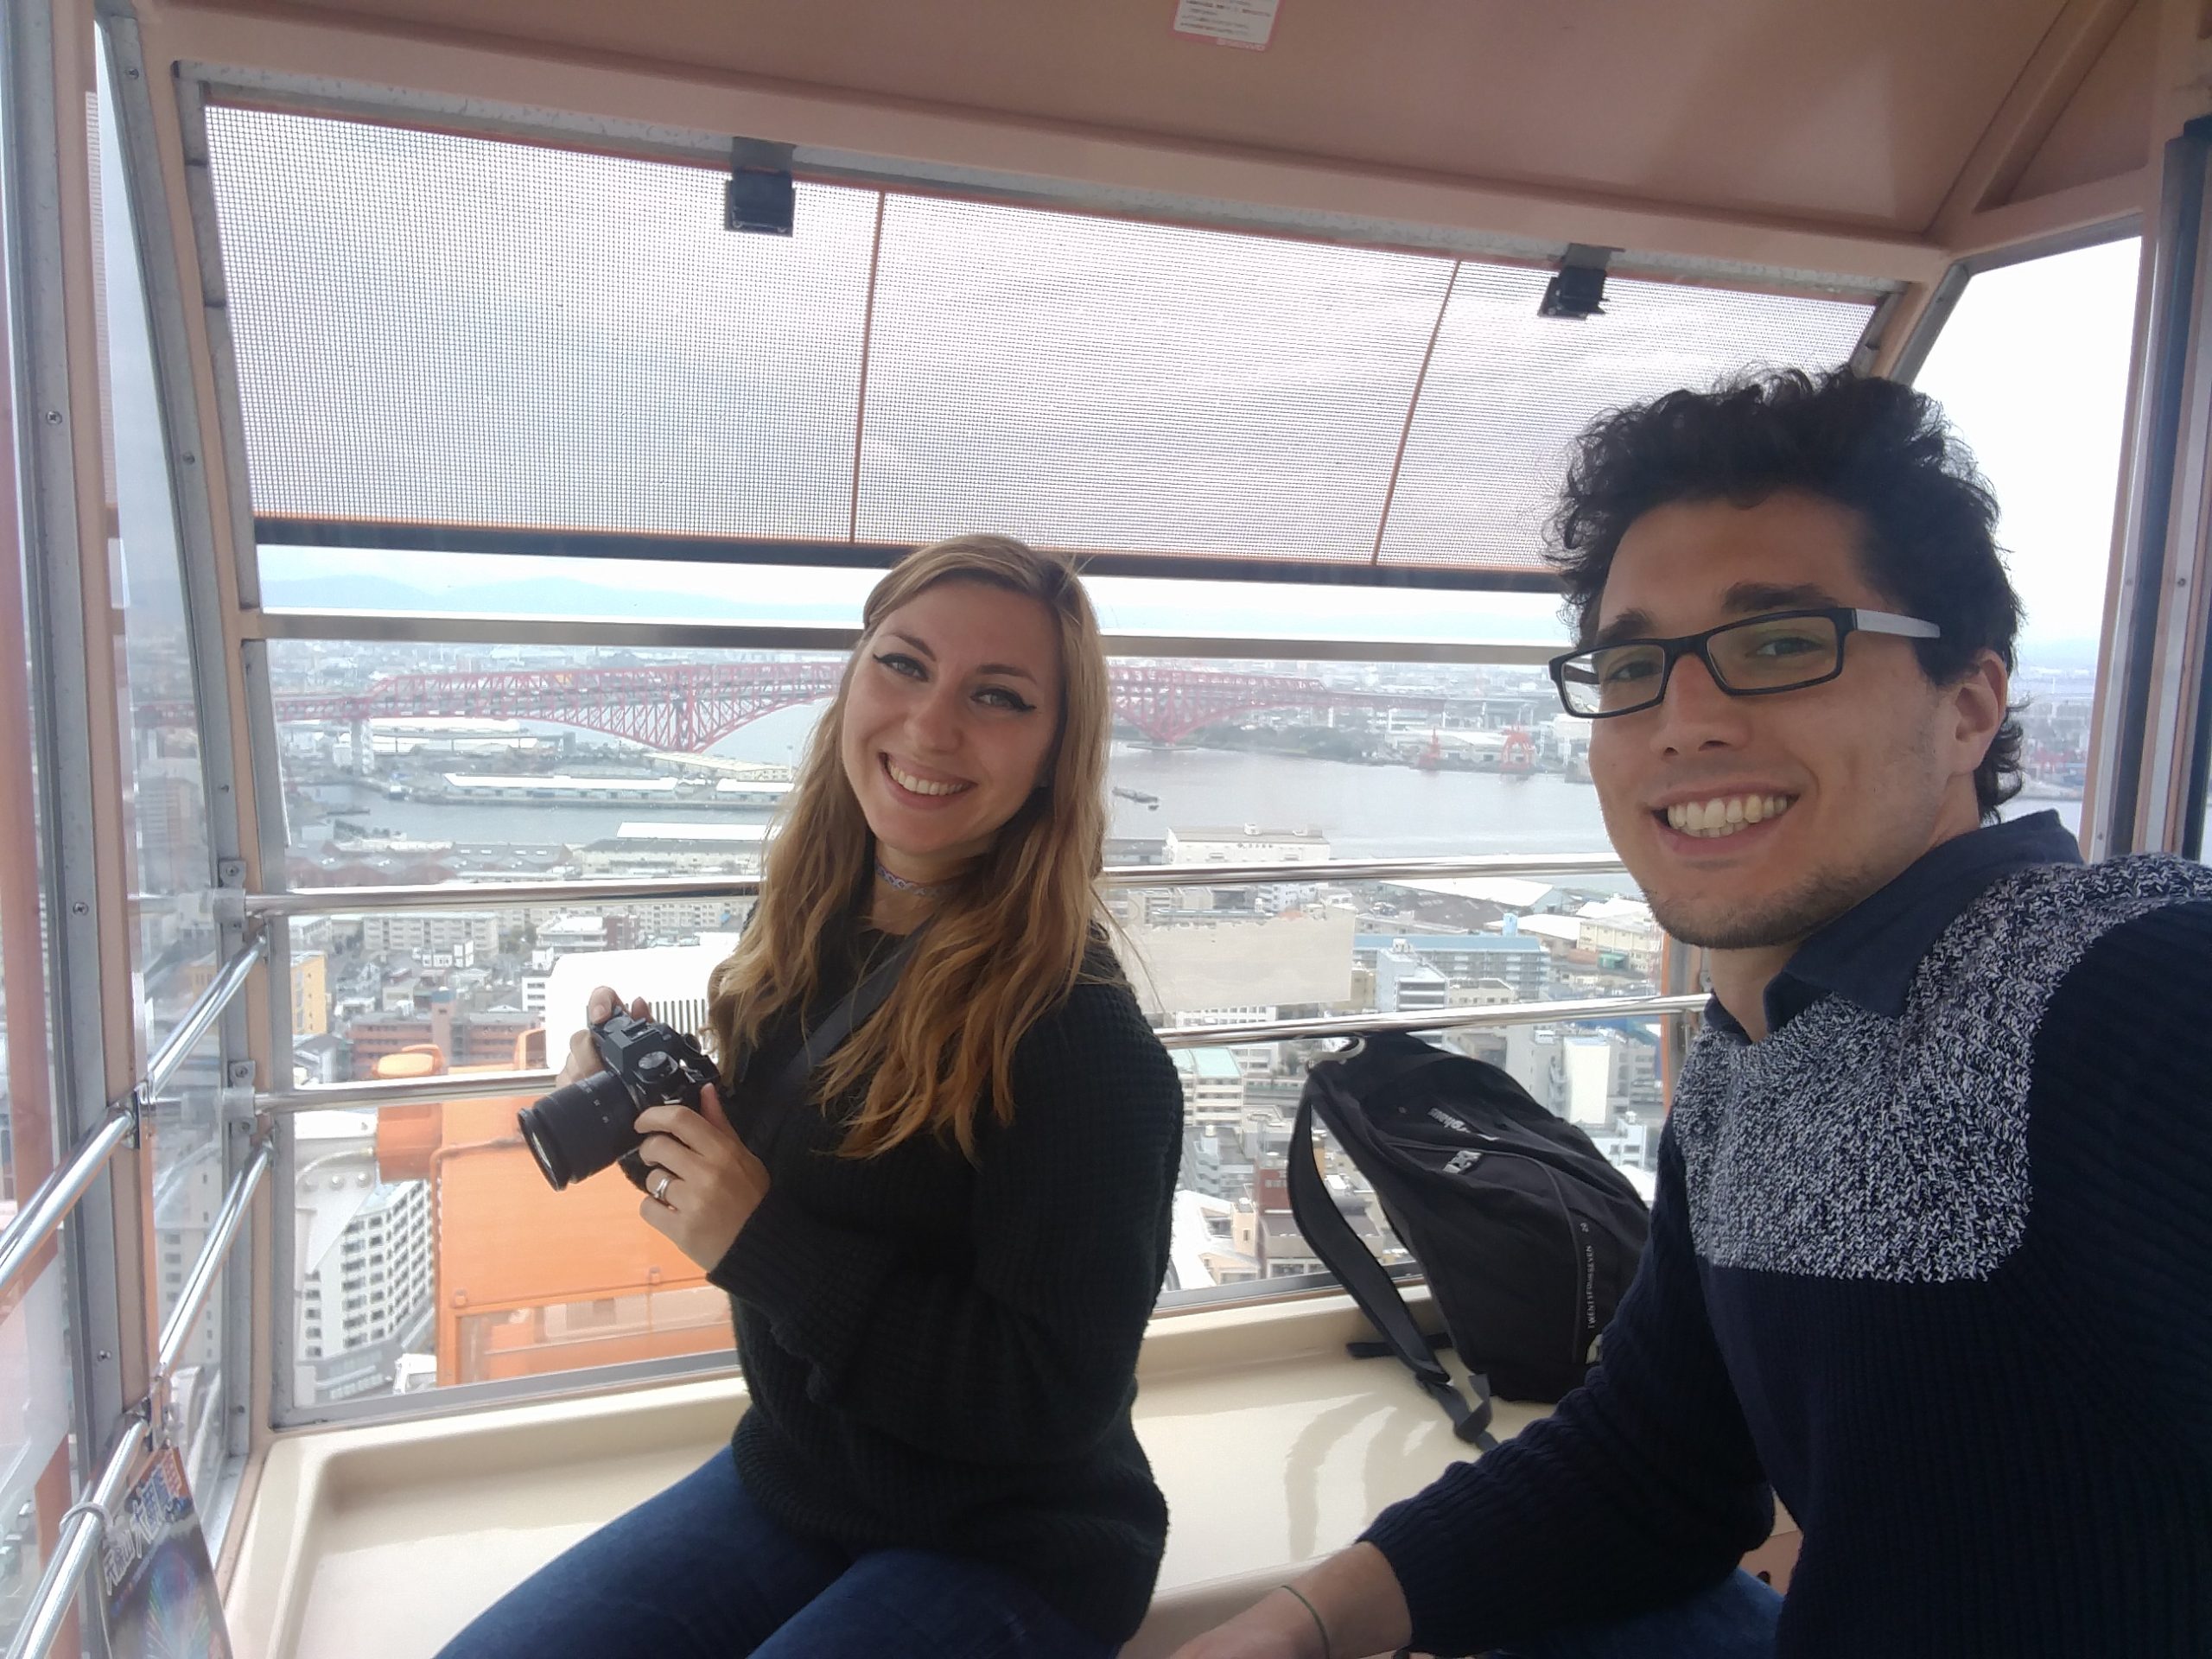 Cory and G taking pictures from the Ferris wheel in Osaka